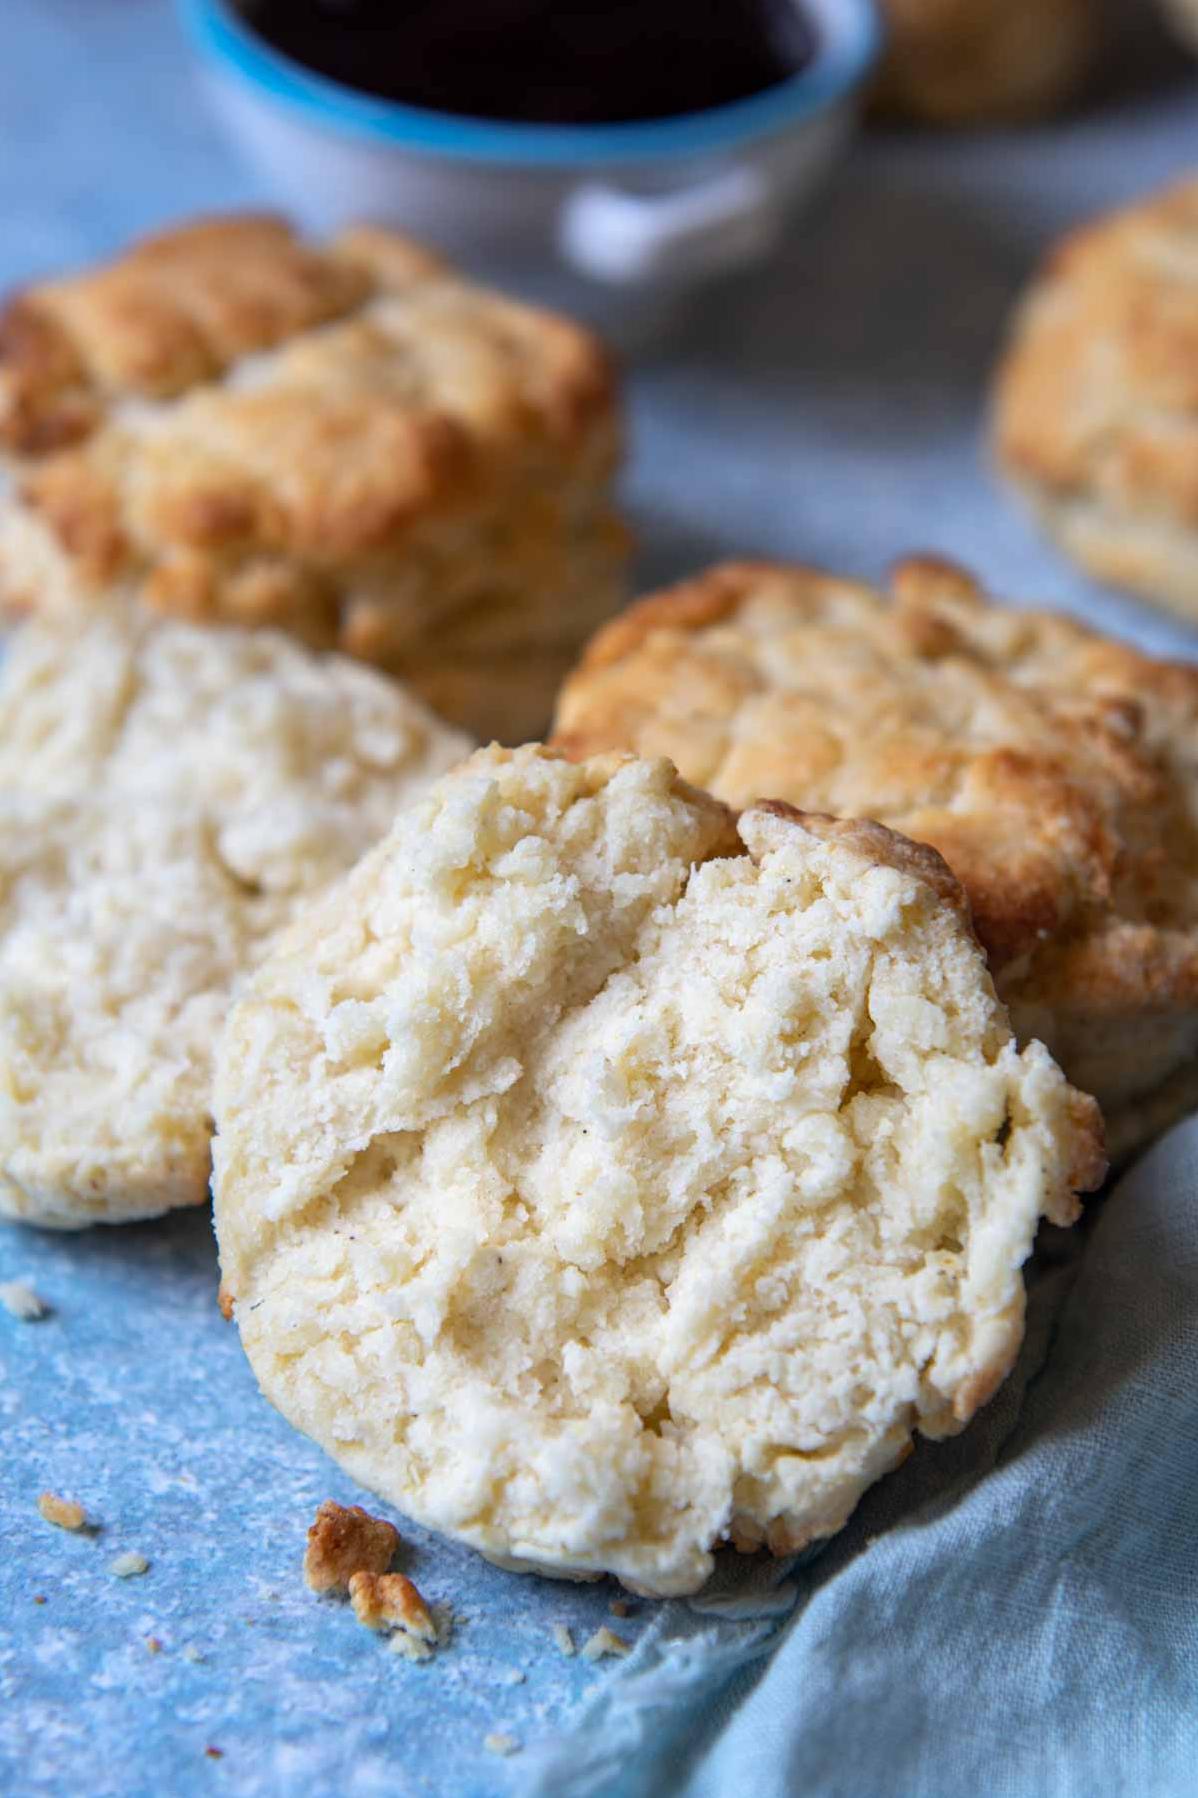  Enjoy a warm gluten-free biscuit for breakfast or as a mid-day snack.